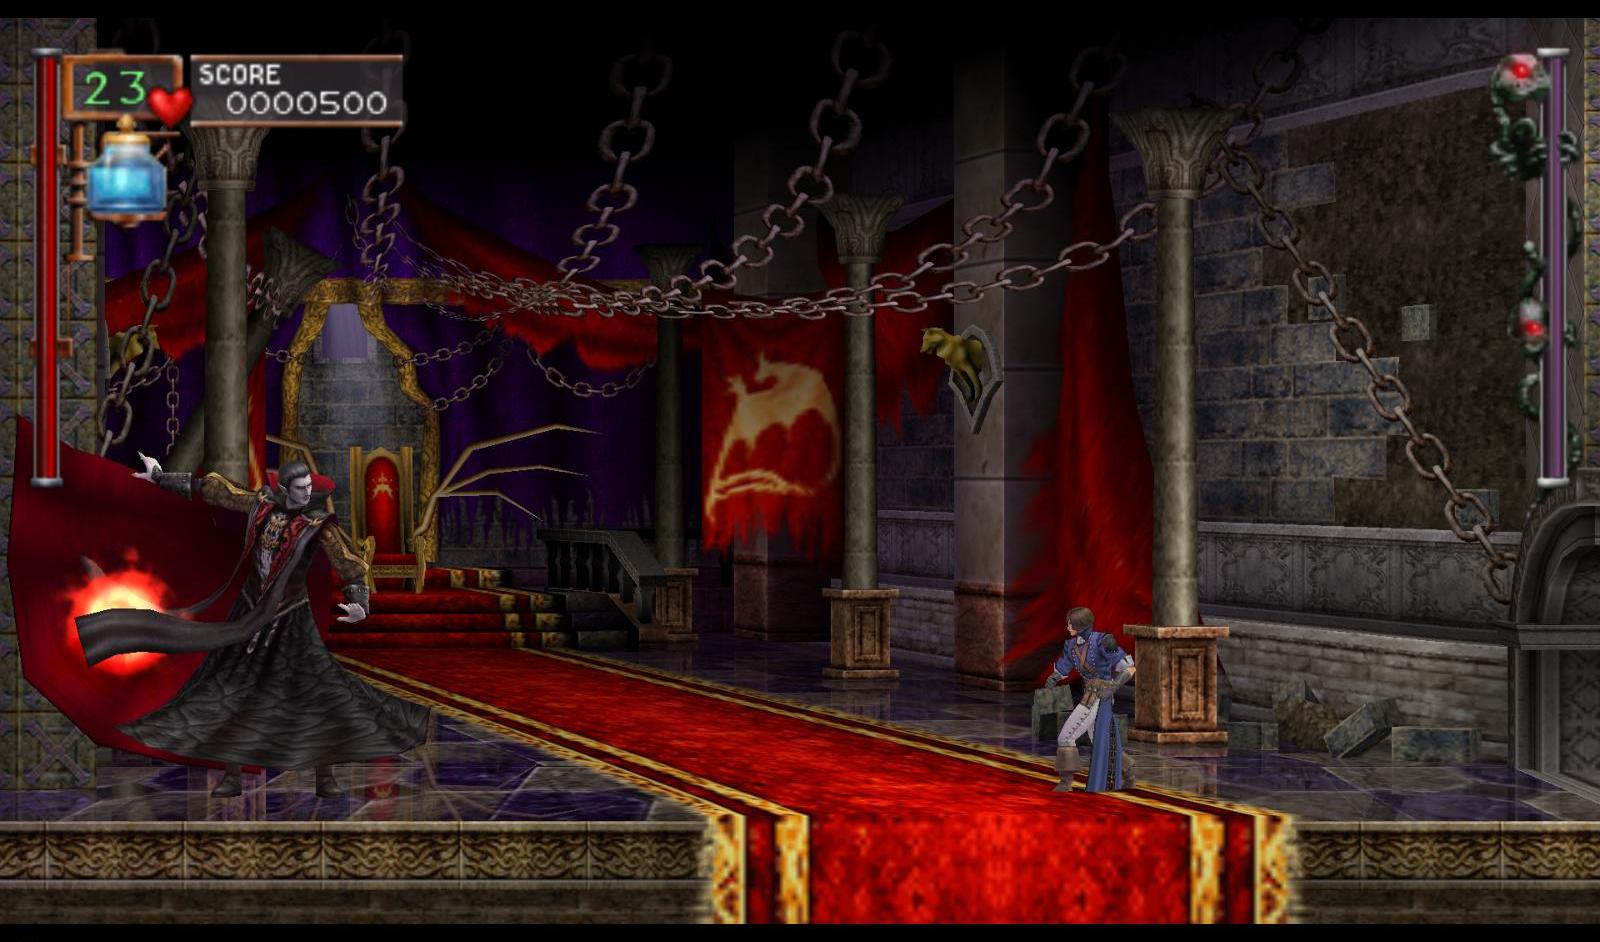 Castlevania: The Dracula X Chronicles is a collection of 3 games. The first unlocked game you're available to play off the bat is Castlevania: Rondo of Blood.